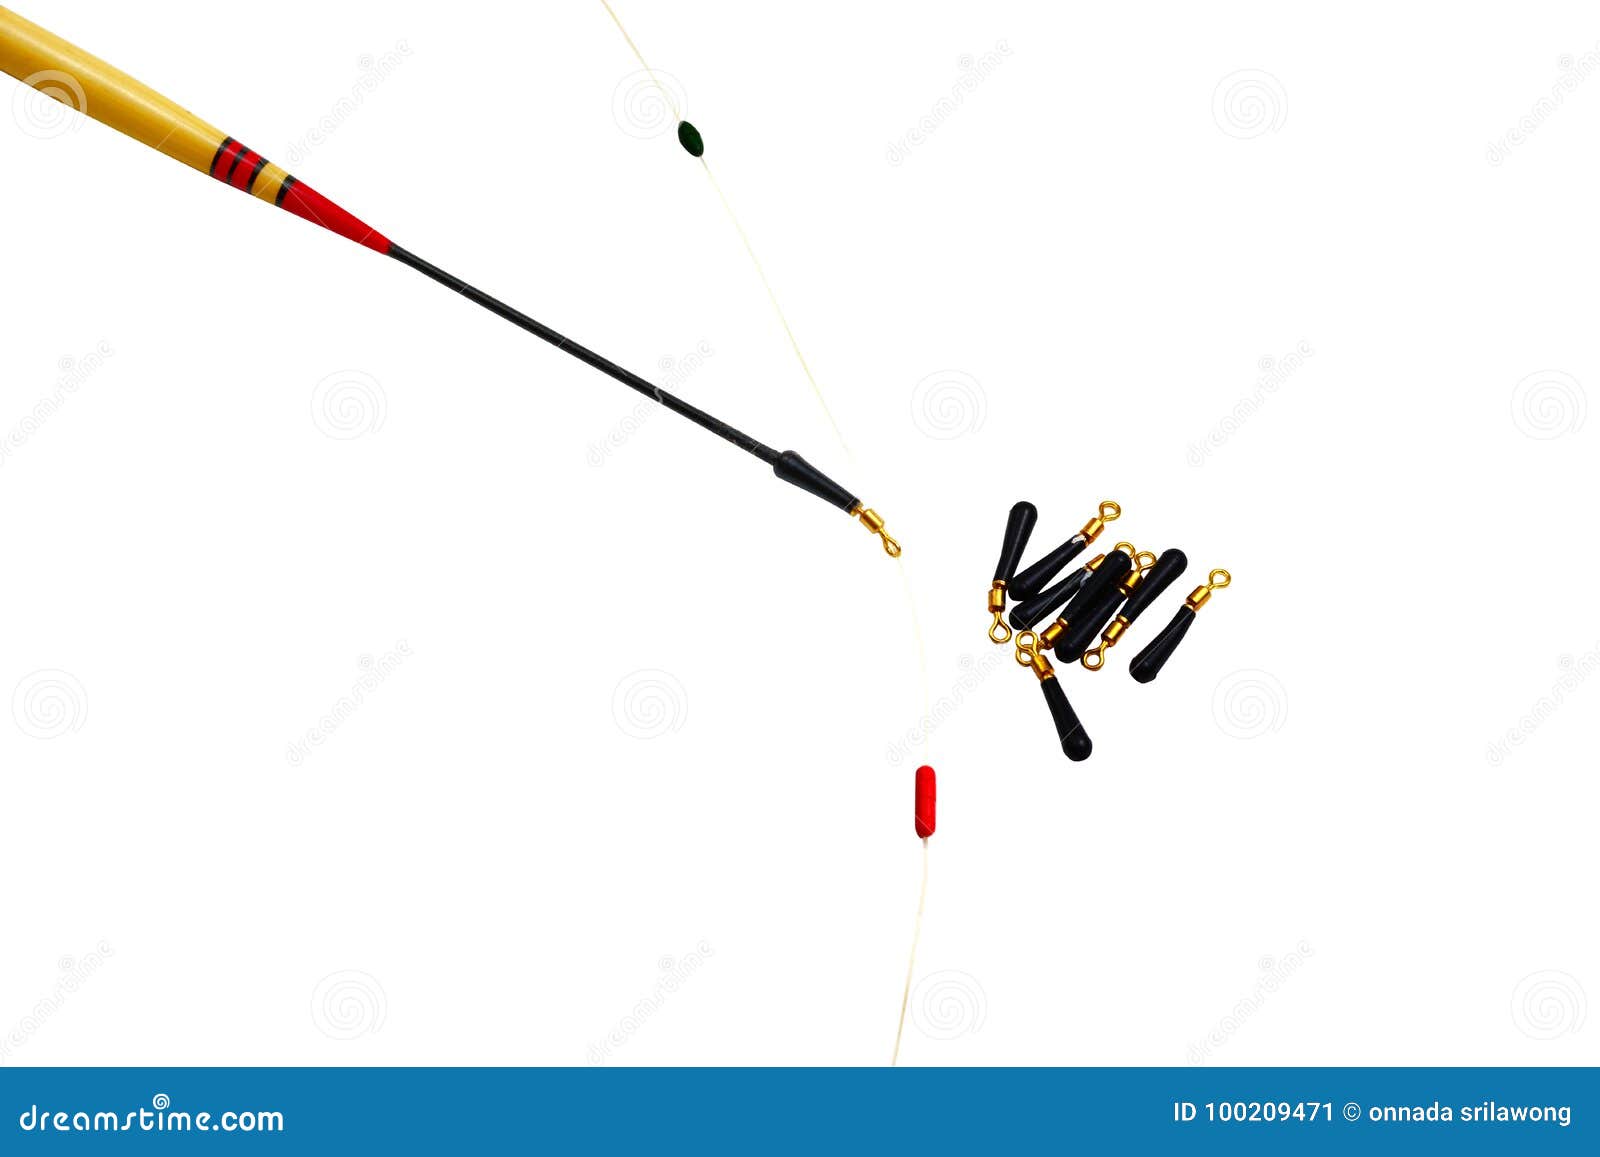 The Fishing Float, Line Stopper and Fishing Accessory Stock Image